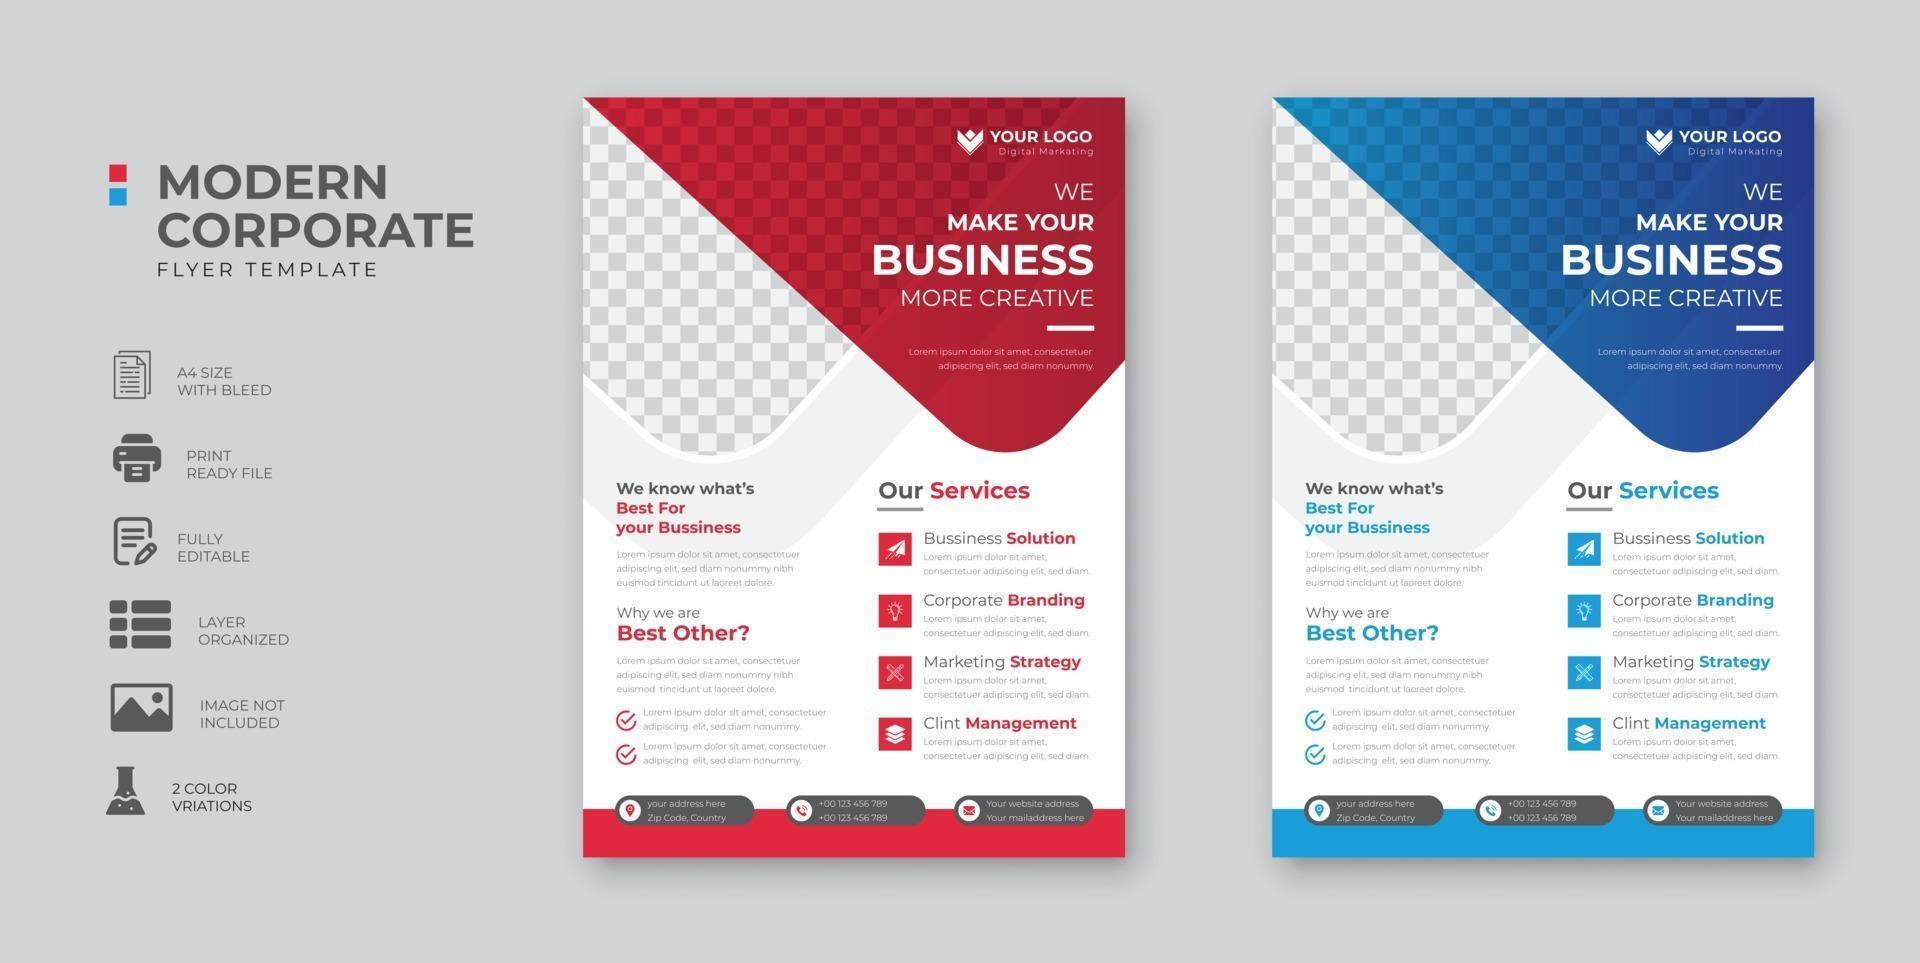 Corporate business digital marketing agency flyer design and brochure cover template vector